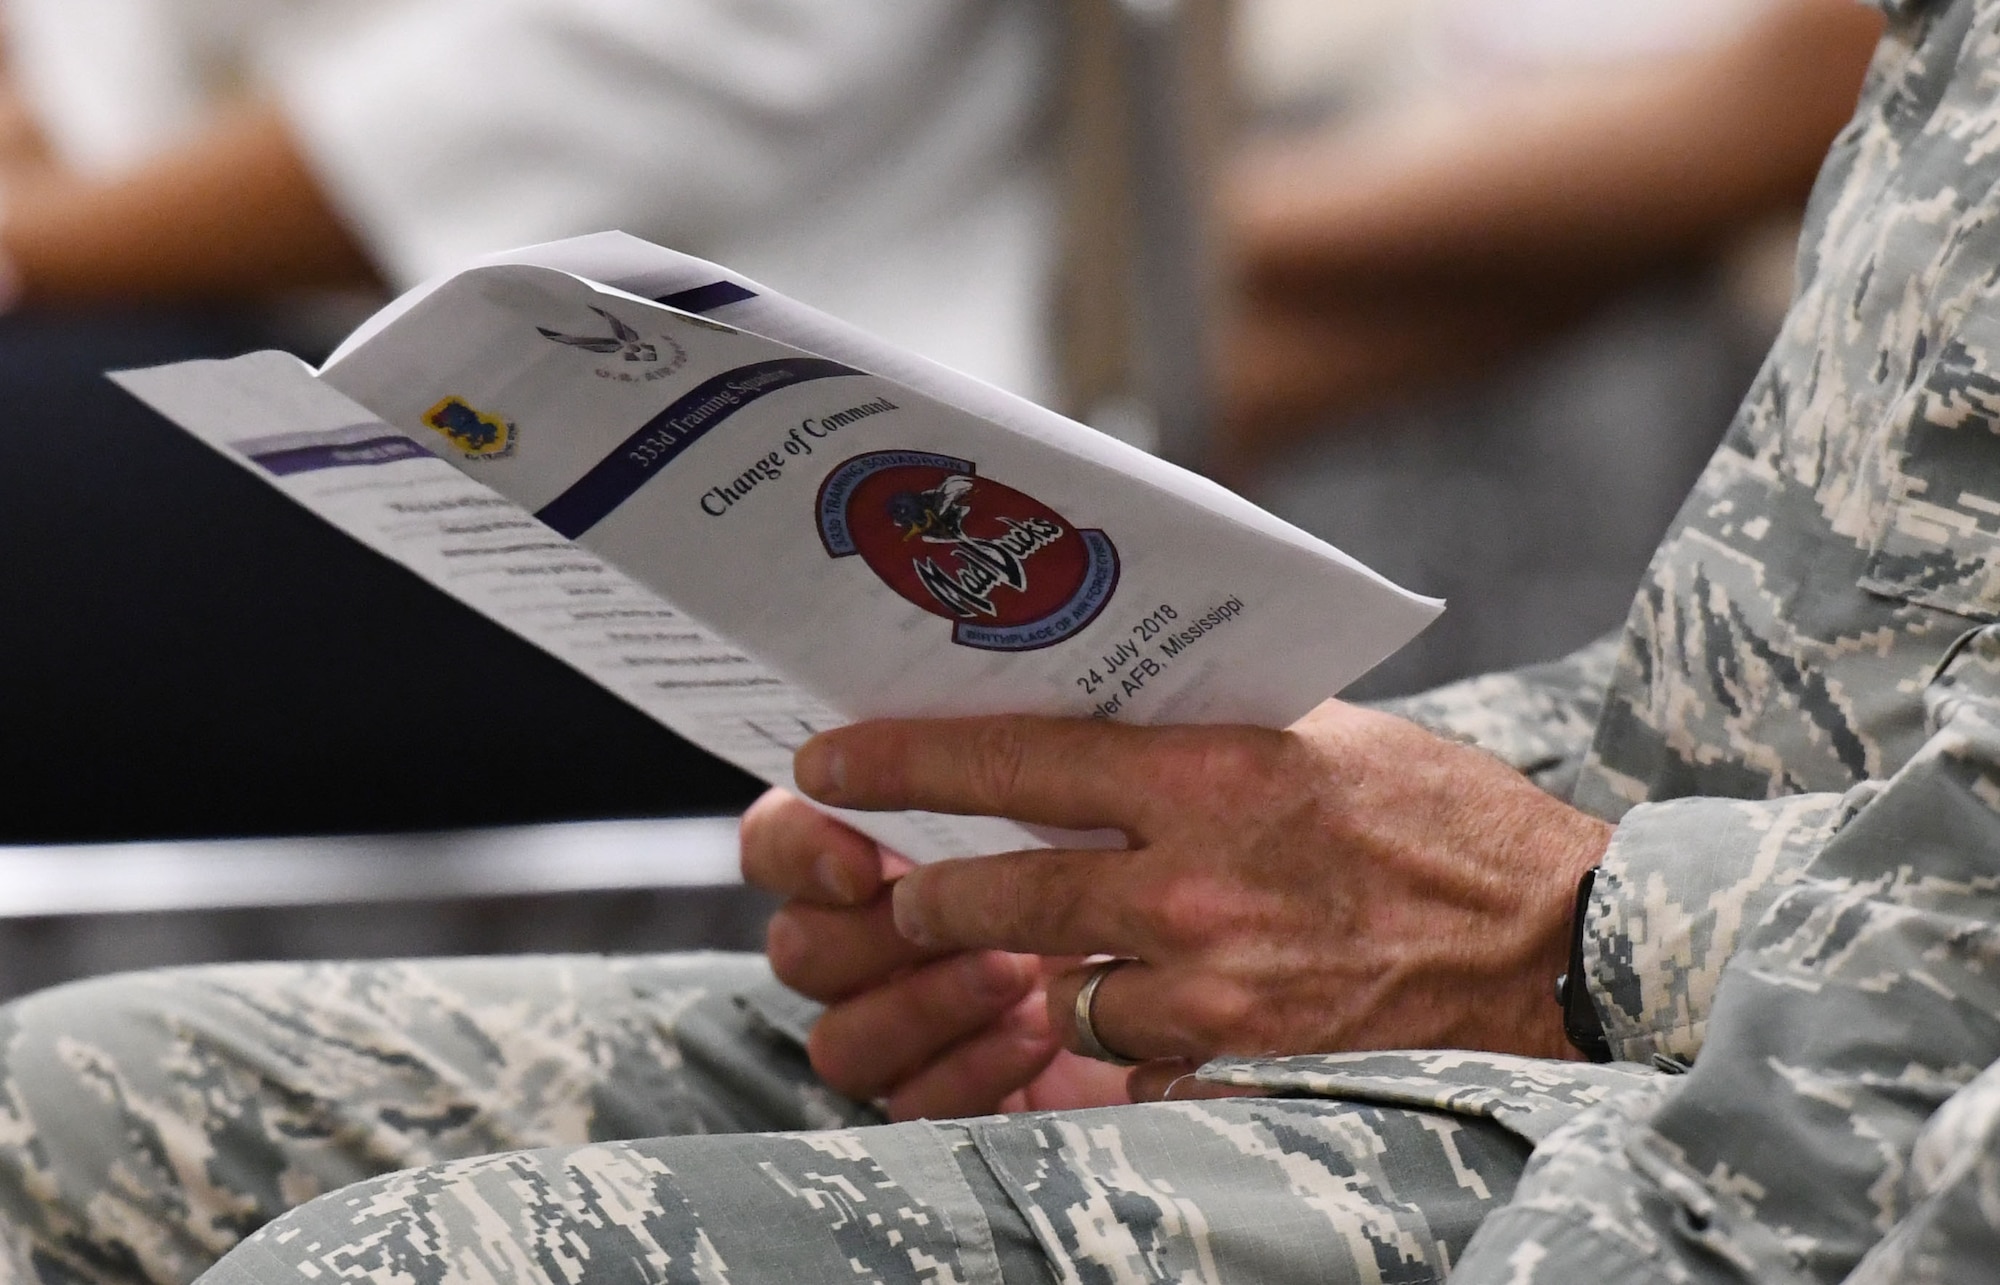 U.S. Air Force Col. Lance Burnett, 81st Training Wing vice commander, views the event program during the 333rd Training Squadron change of command ceremony in the Roberts Consolidated Aircraft Maintenance Facility at Keesler Air Force Base, Mississippi, July 24, 2018. U.S. Air Force Lt. Col. Andrew Miller, incoming 333rd TRS commander, assumed command from Lt. Col. Nathaniel Huston, outgoing 333rd TRS commander. (U.S. Air Force photo by Kemberly Groue)